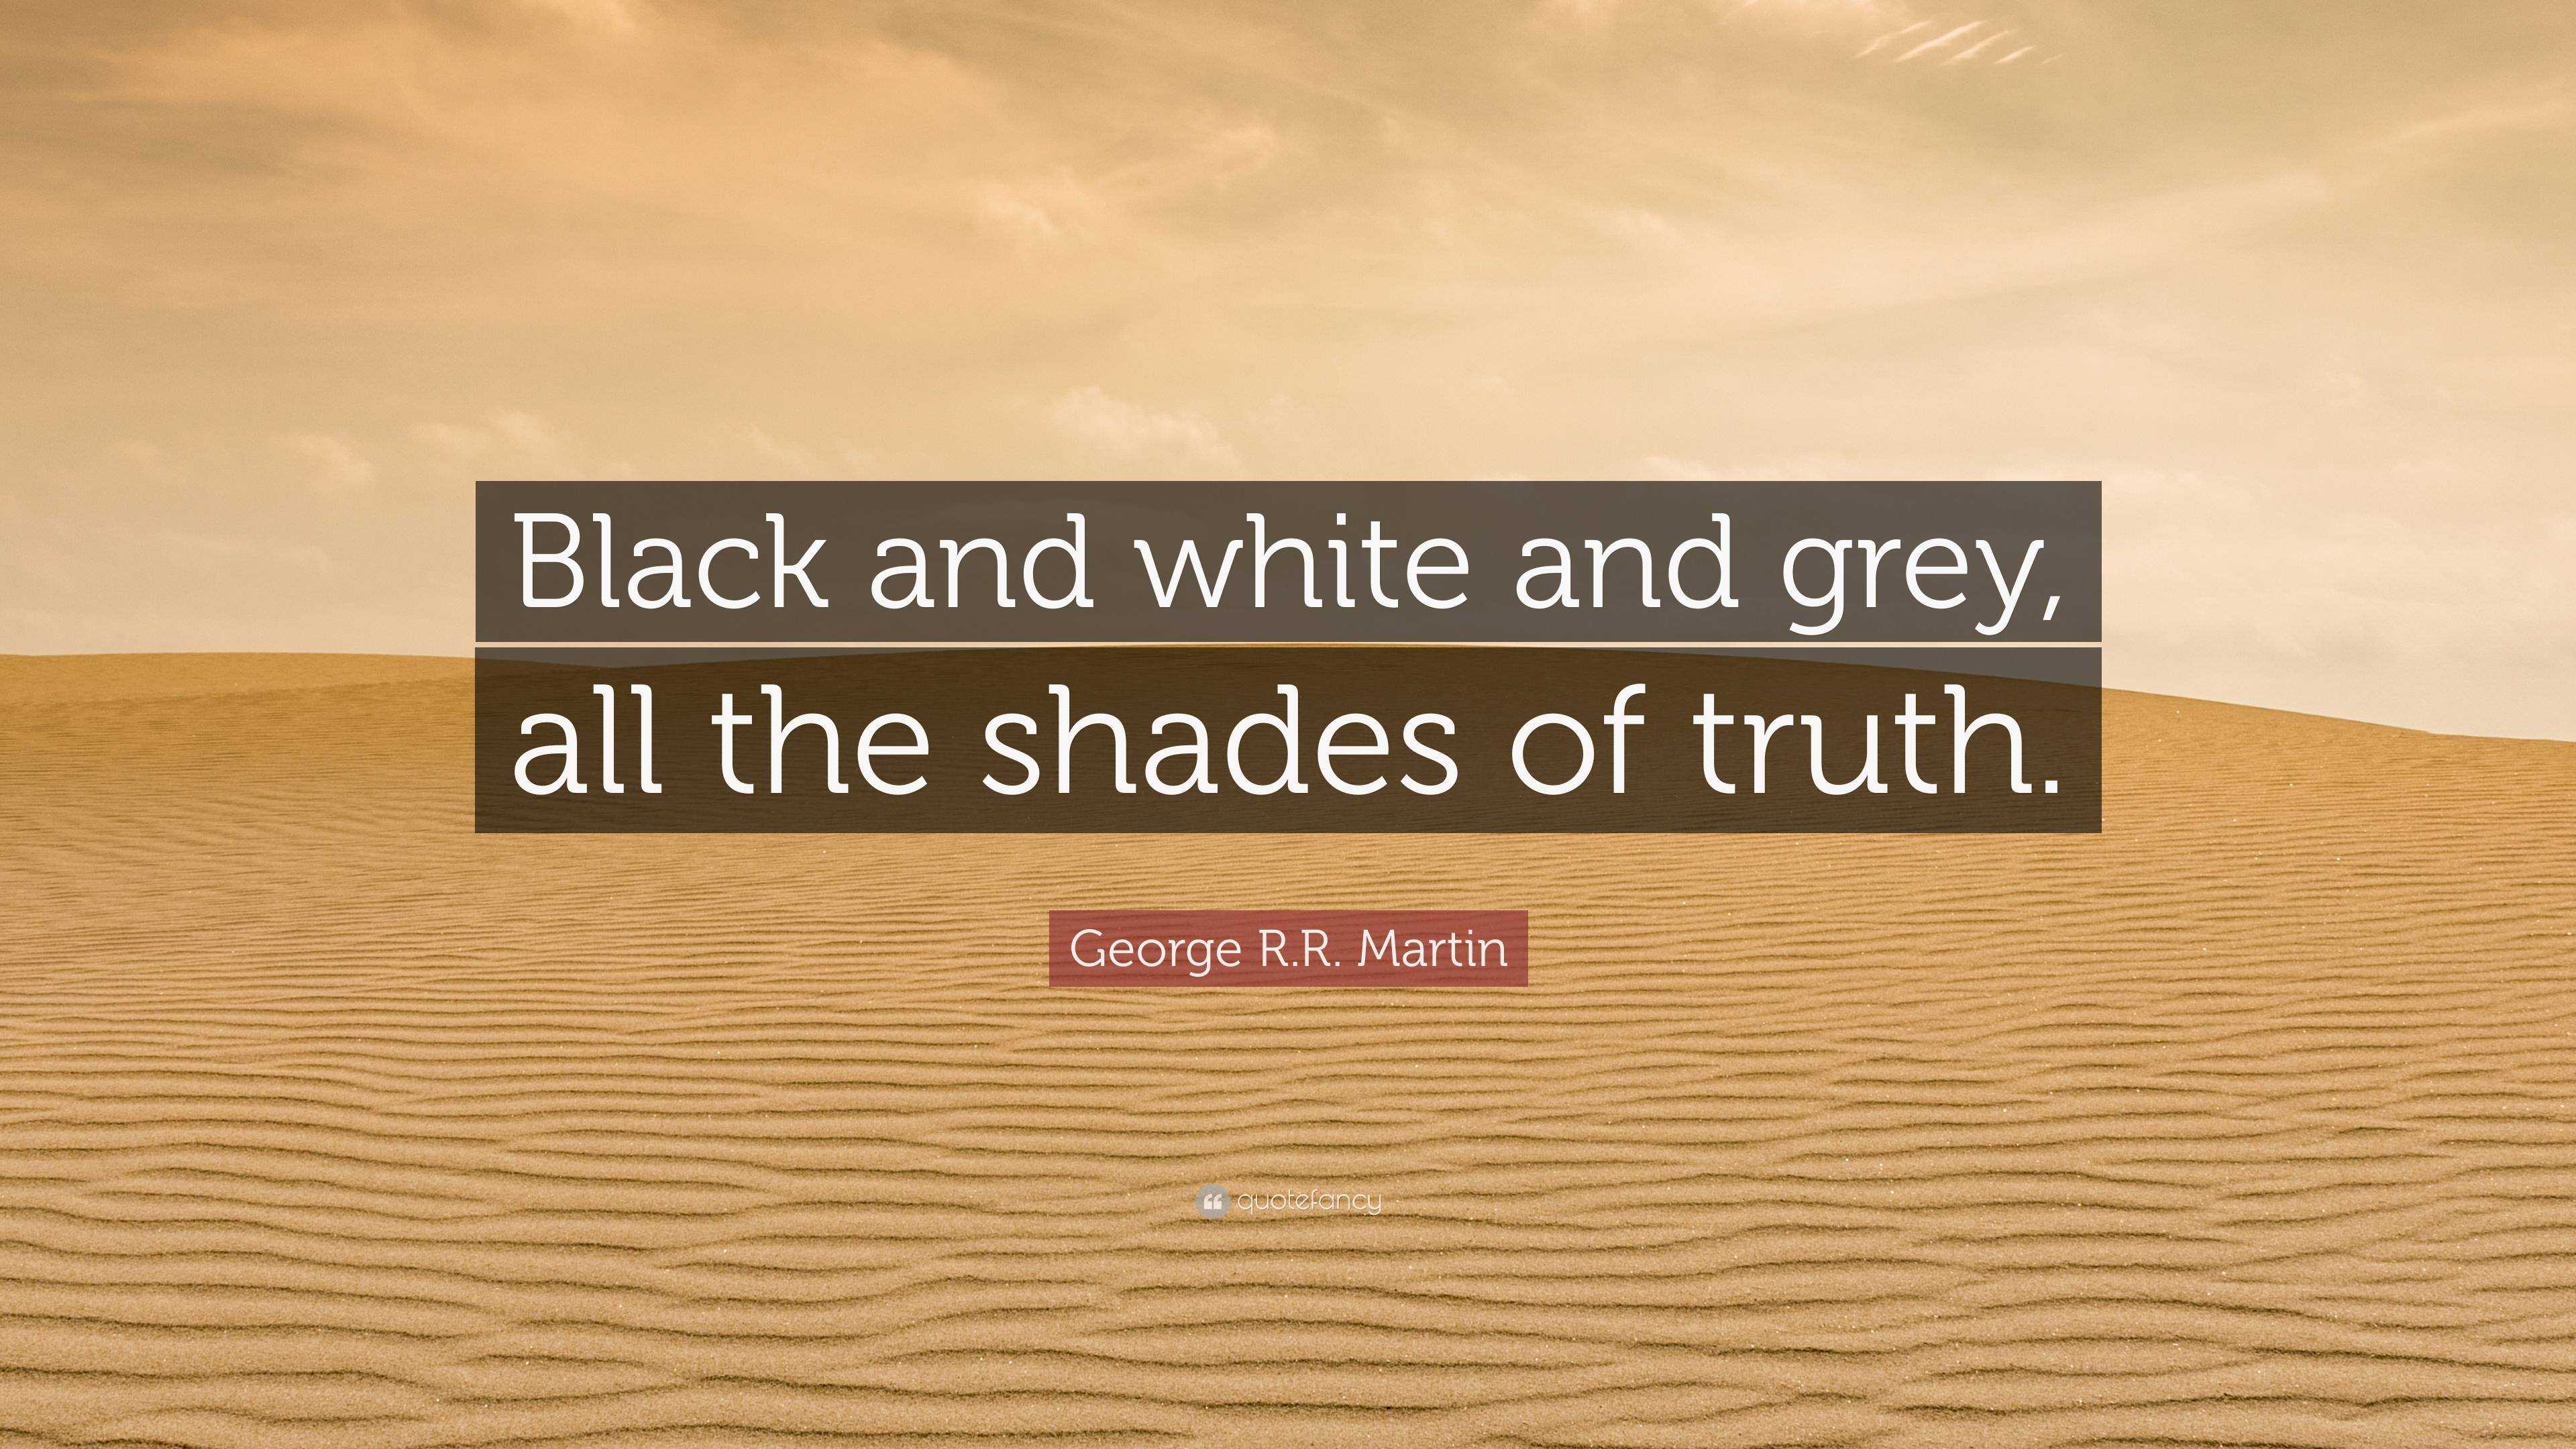 100 Black and White Quotes On Photography and Life's Shades of Gray